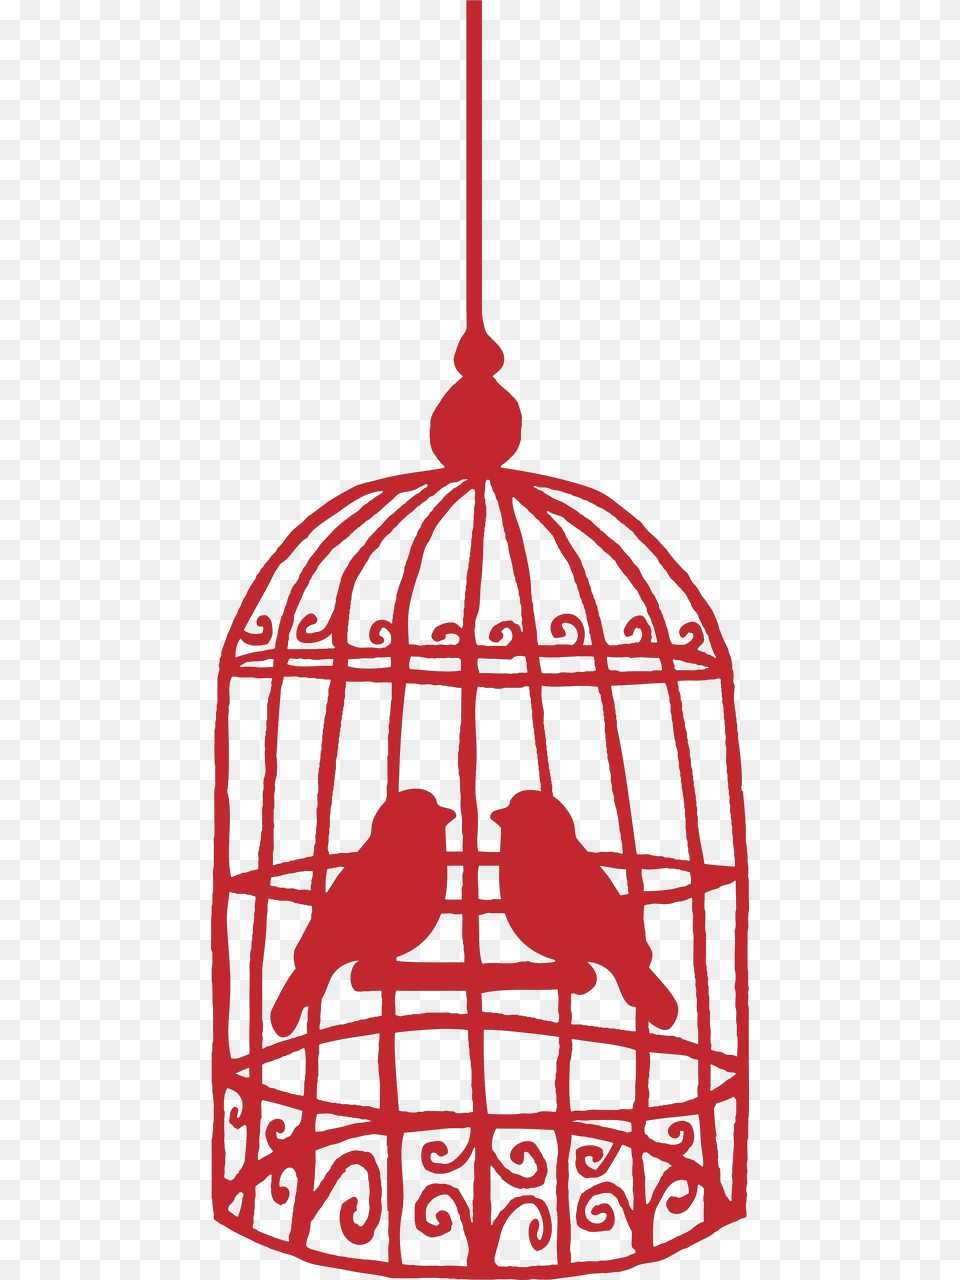 Love Bird Cage Songbird Png Image